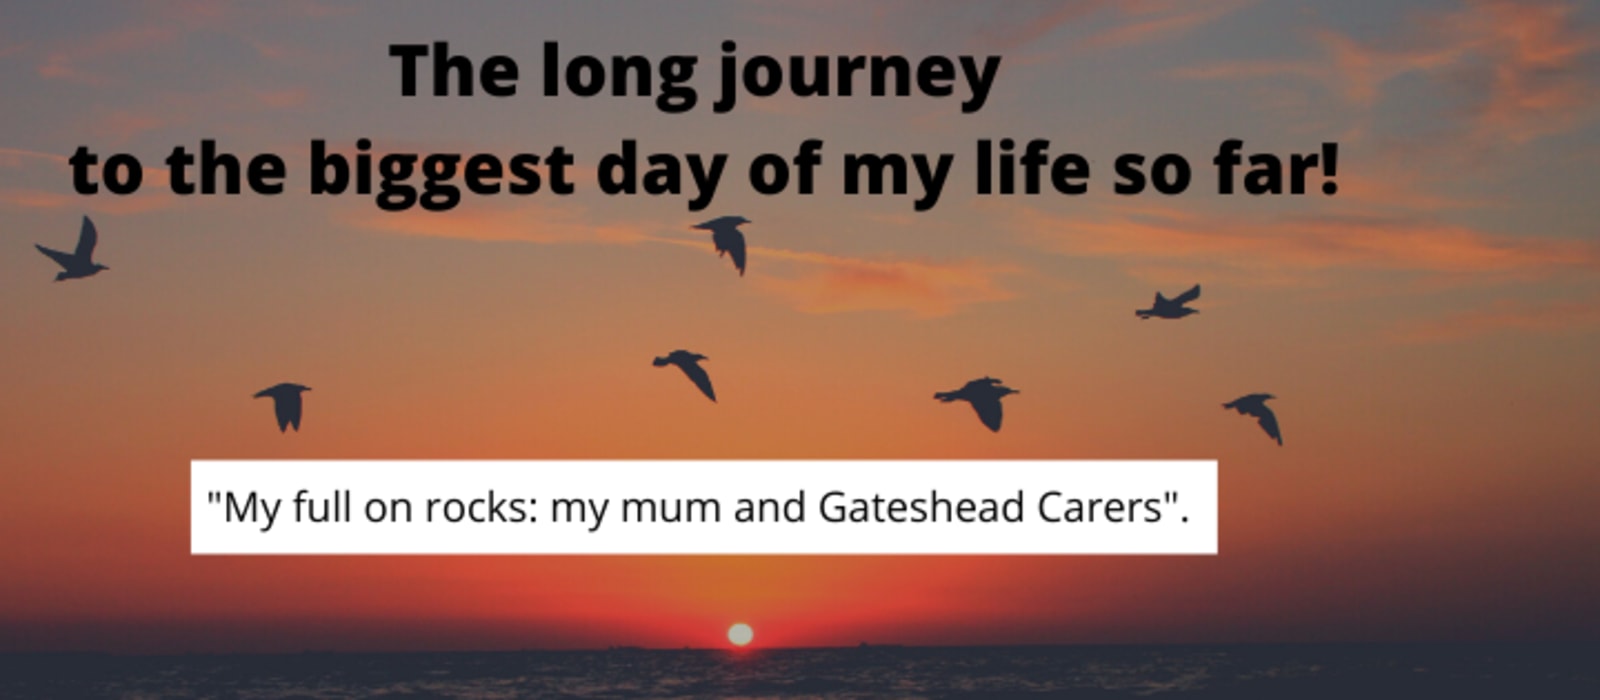 My ‘Major Support System’ and ‘Full on Rocks’ my mum and Gateshead Carers